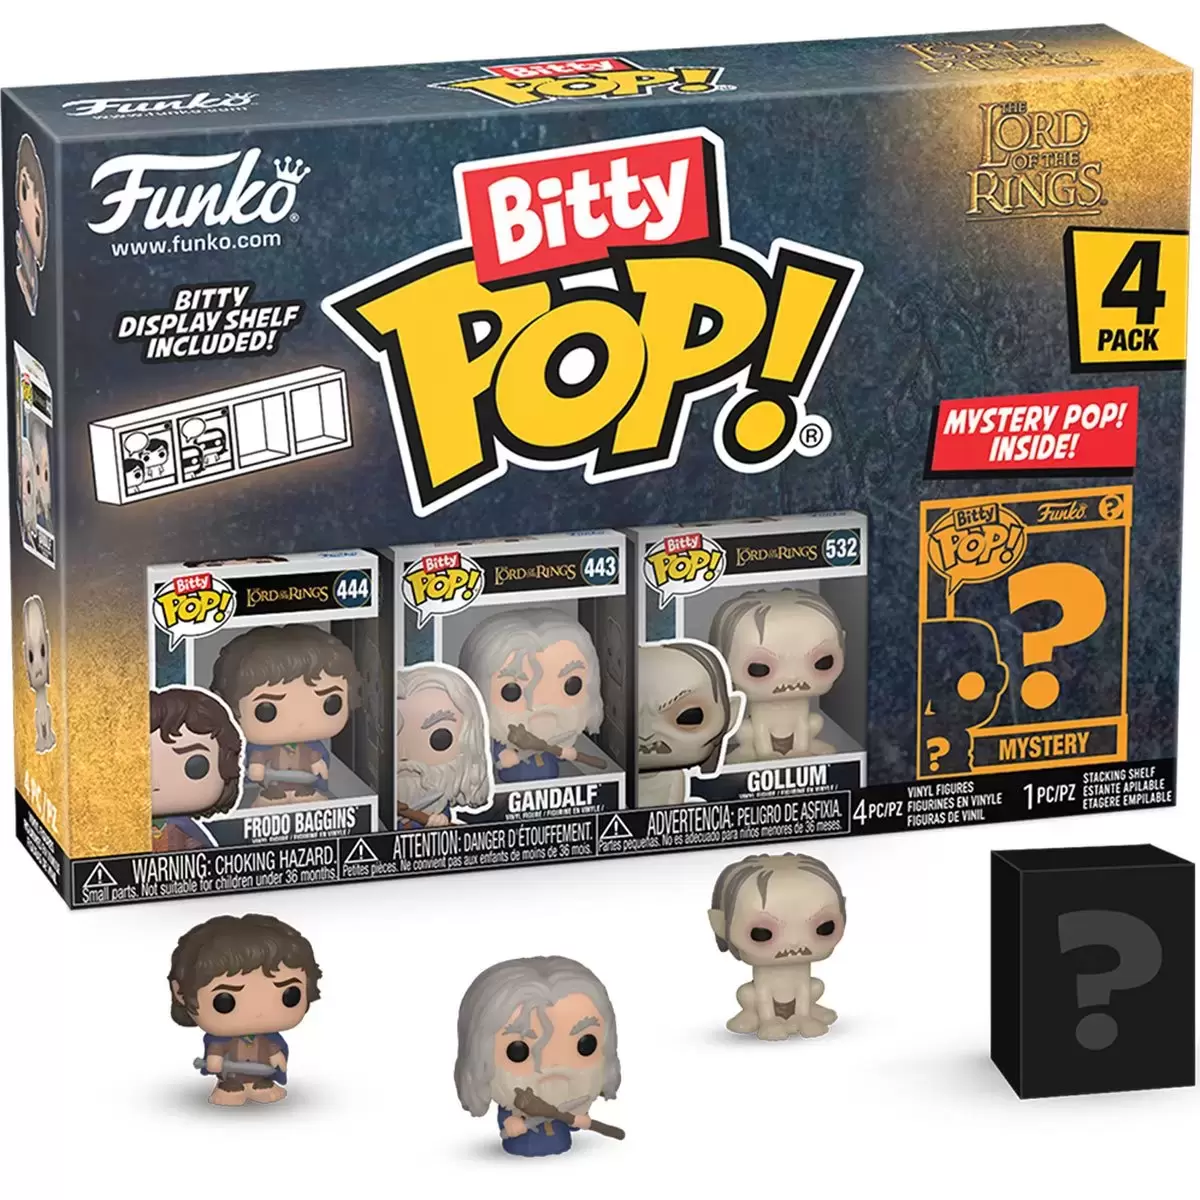 Bitty POP! - Lord of The Rings - Frodo Baggins, Gandalf, Gollum & Mystery